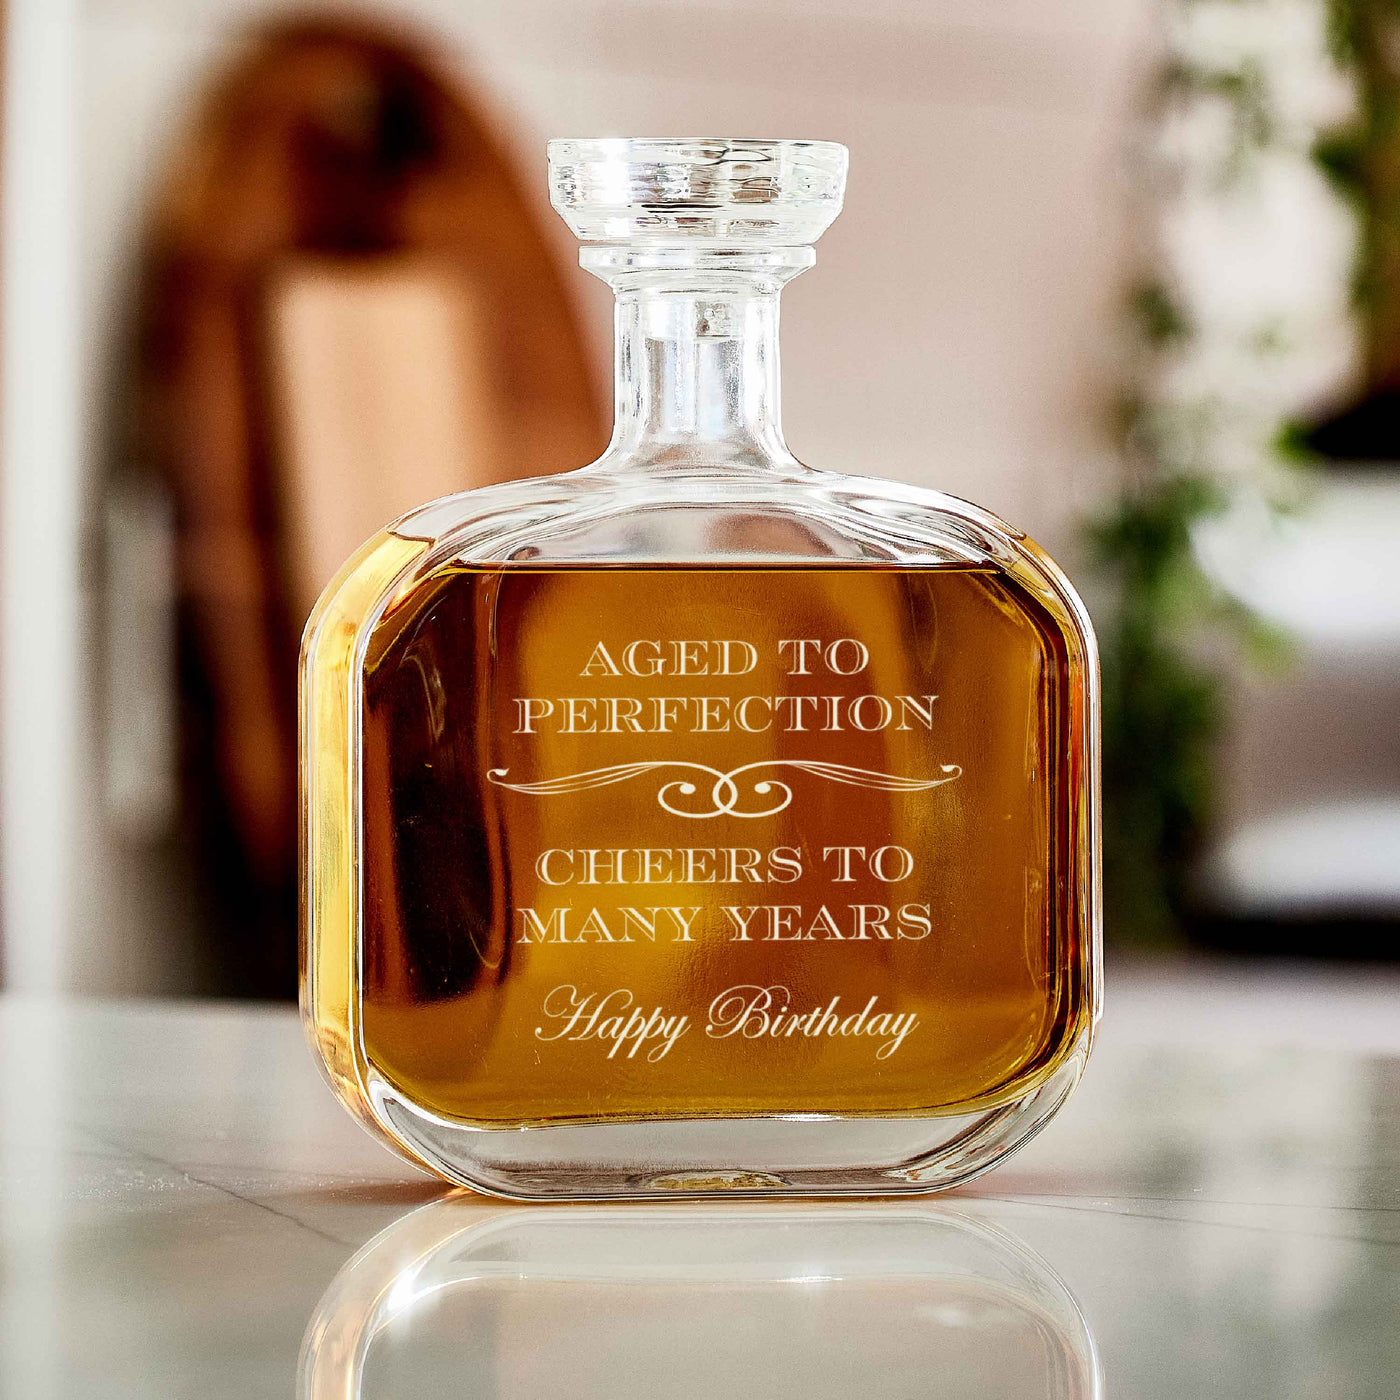 Birthday Decanter "Aged to Perfection" Prestige Bottle